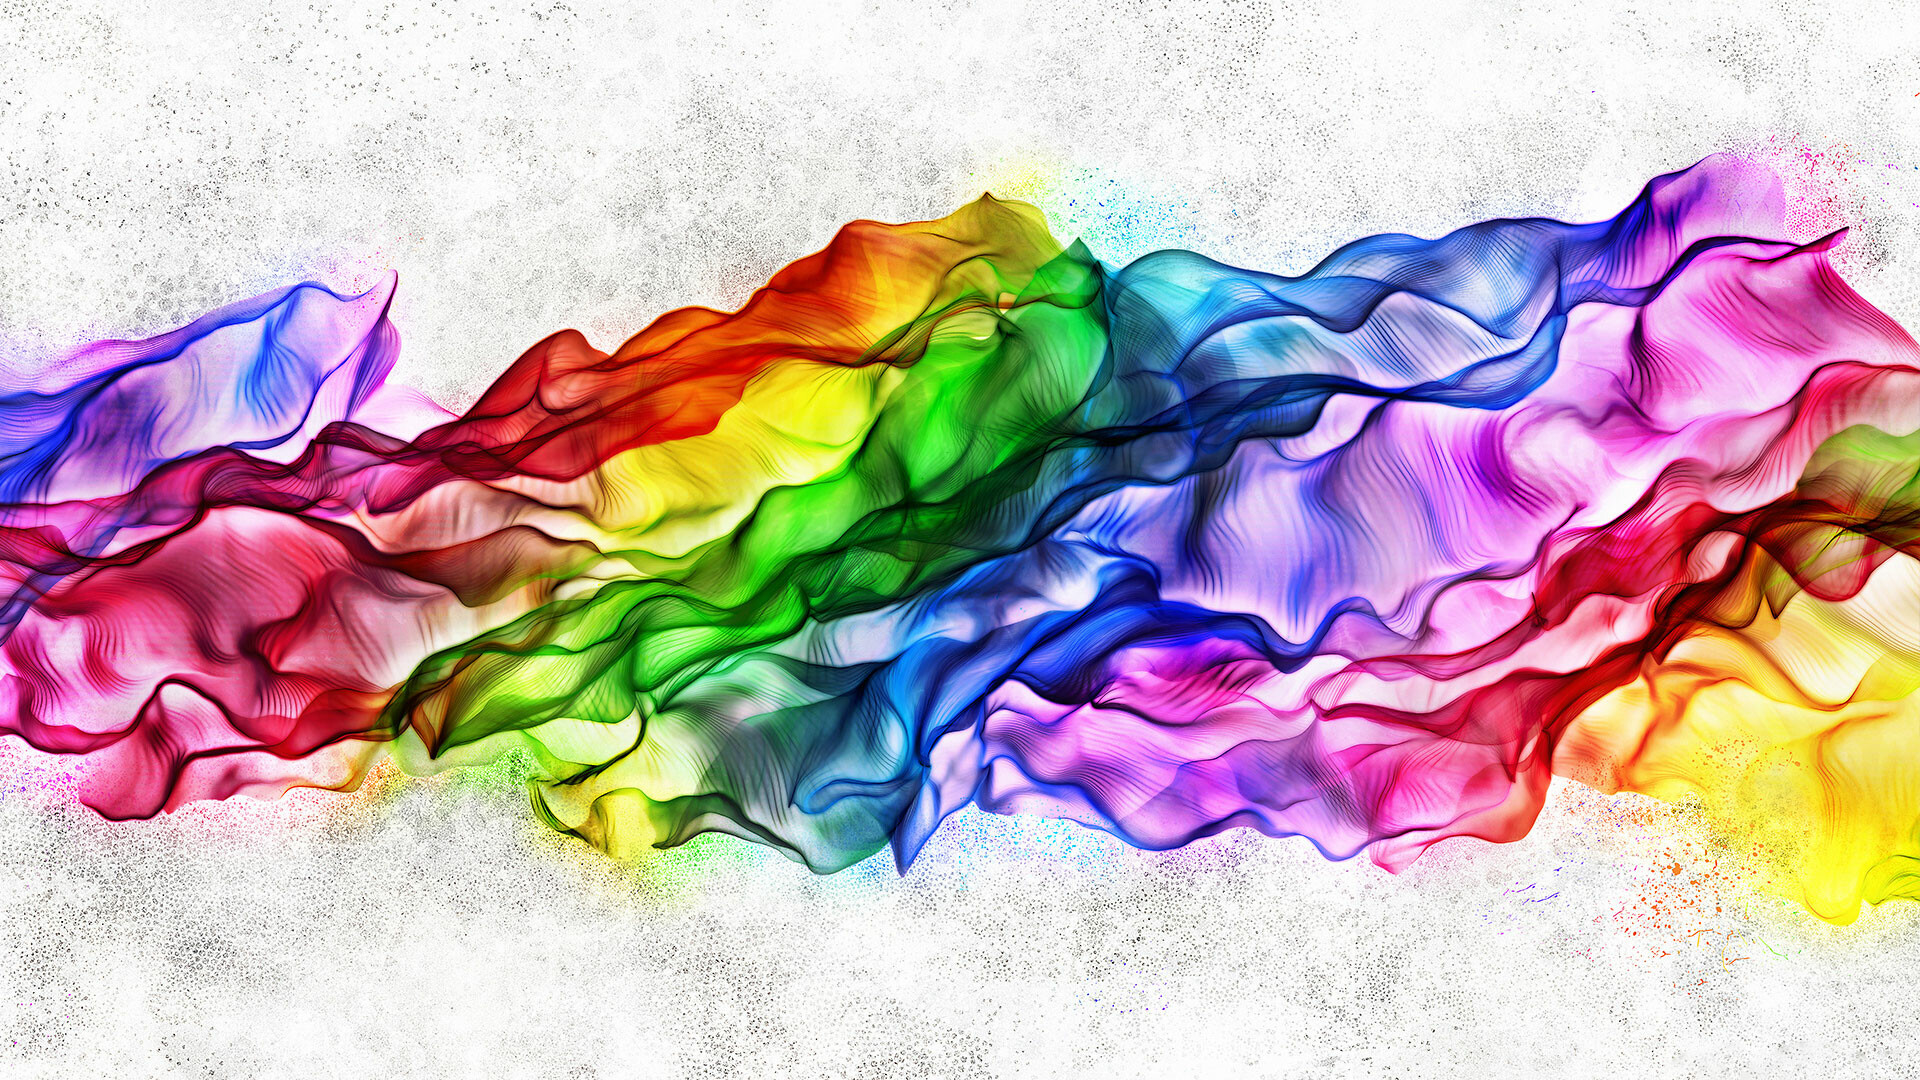 Rainbow Colors: A pictorial representation of an idea, Pattern. 1920x1080 Full HD Wallpaper.